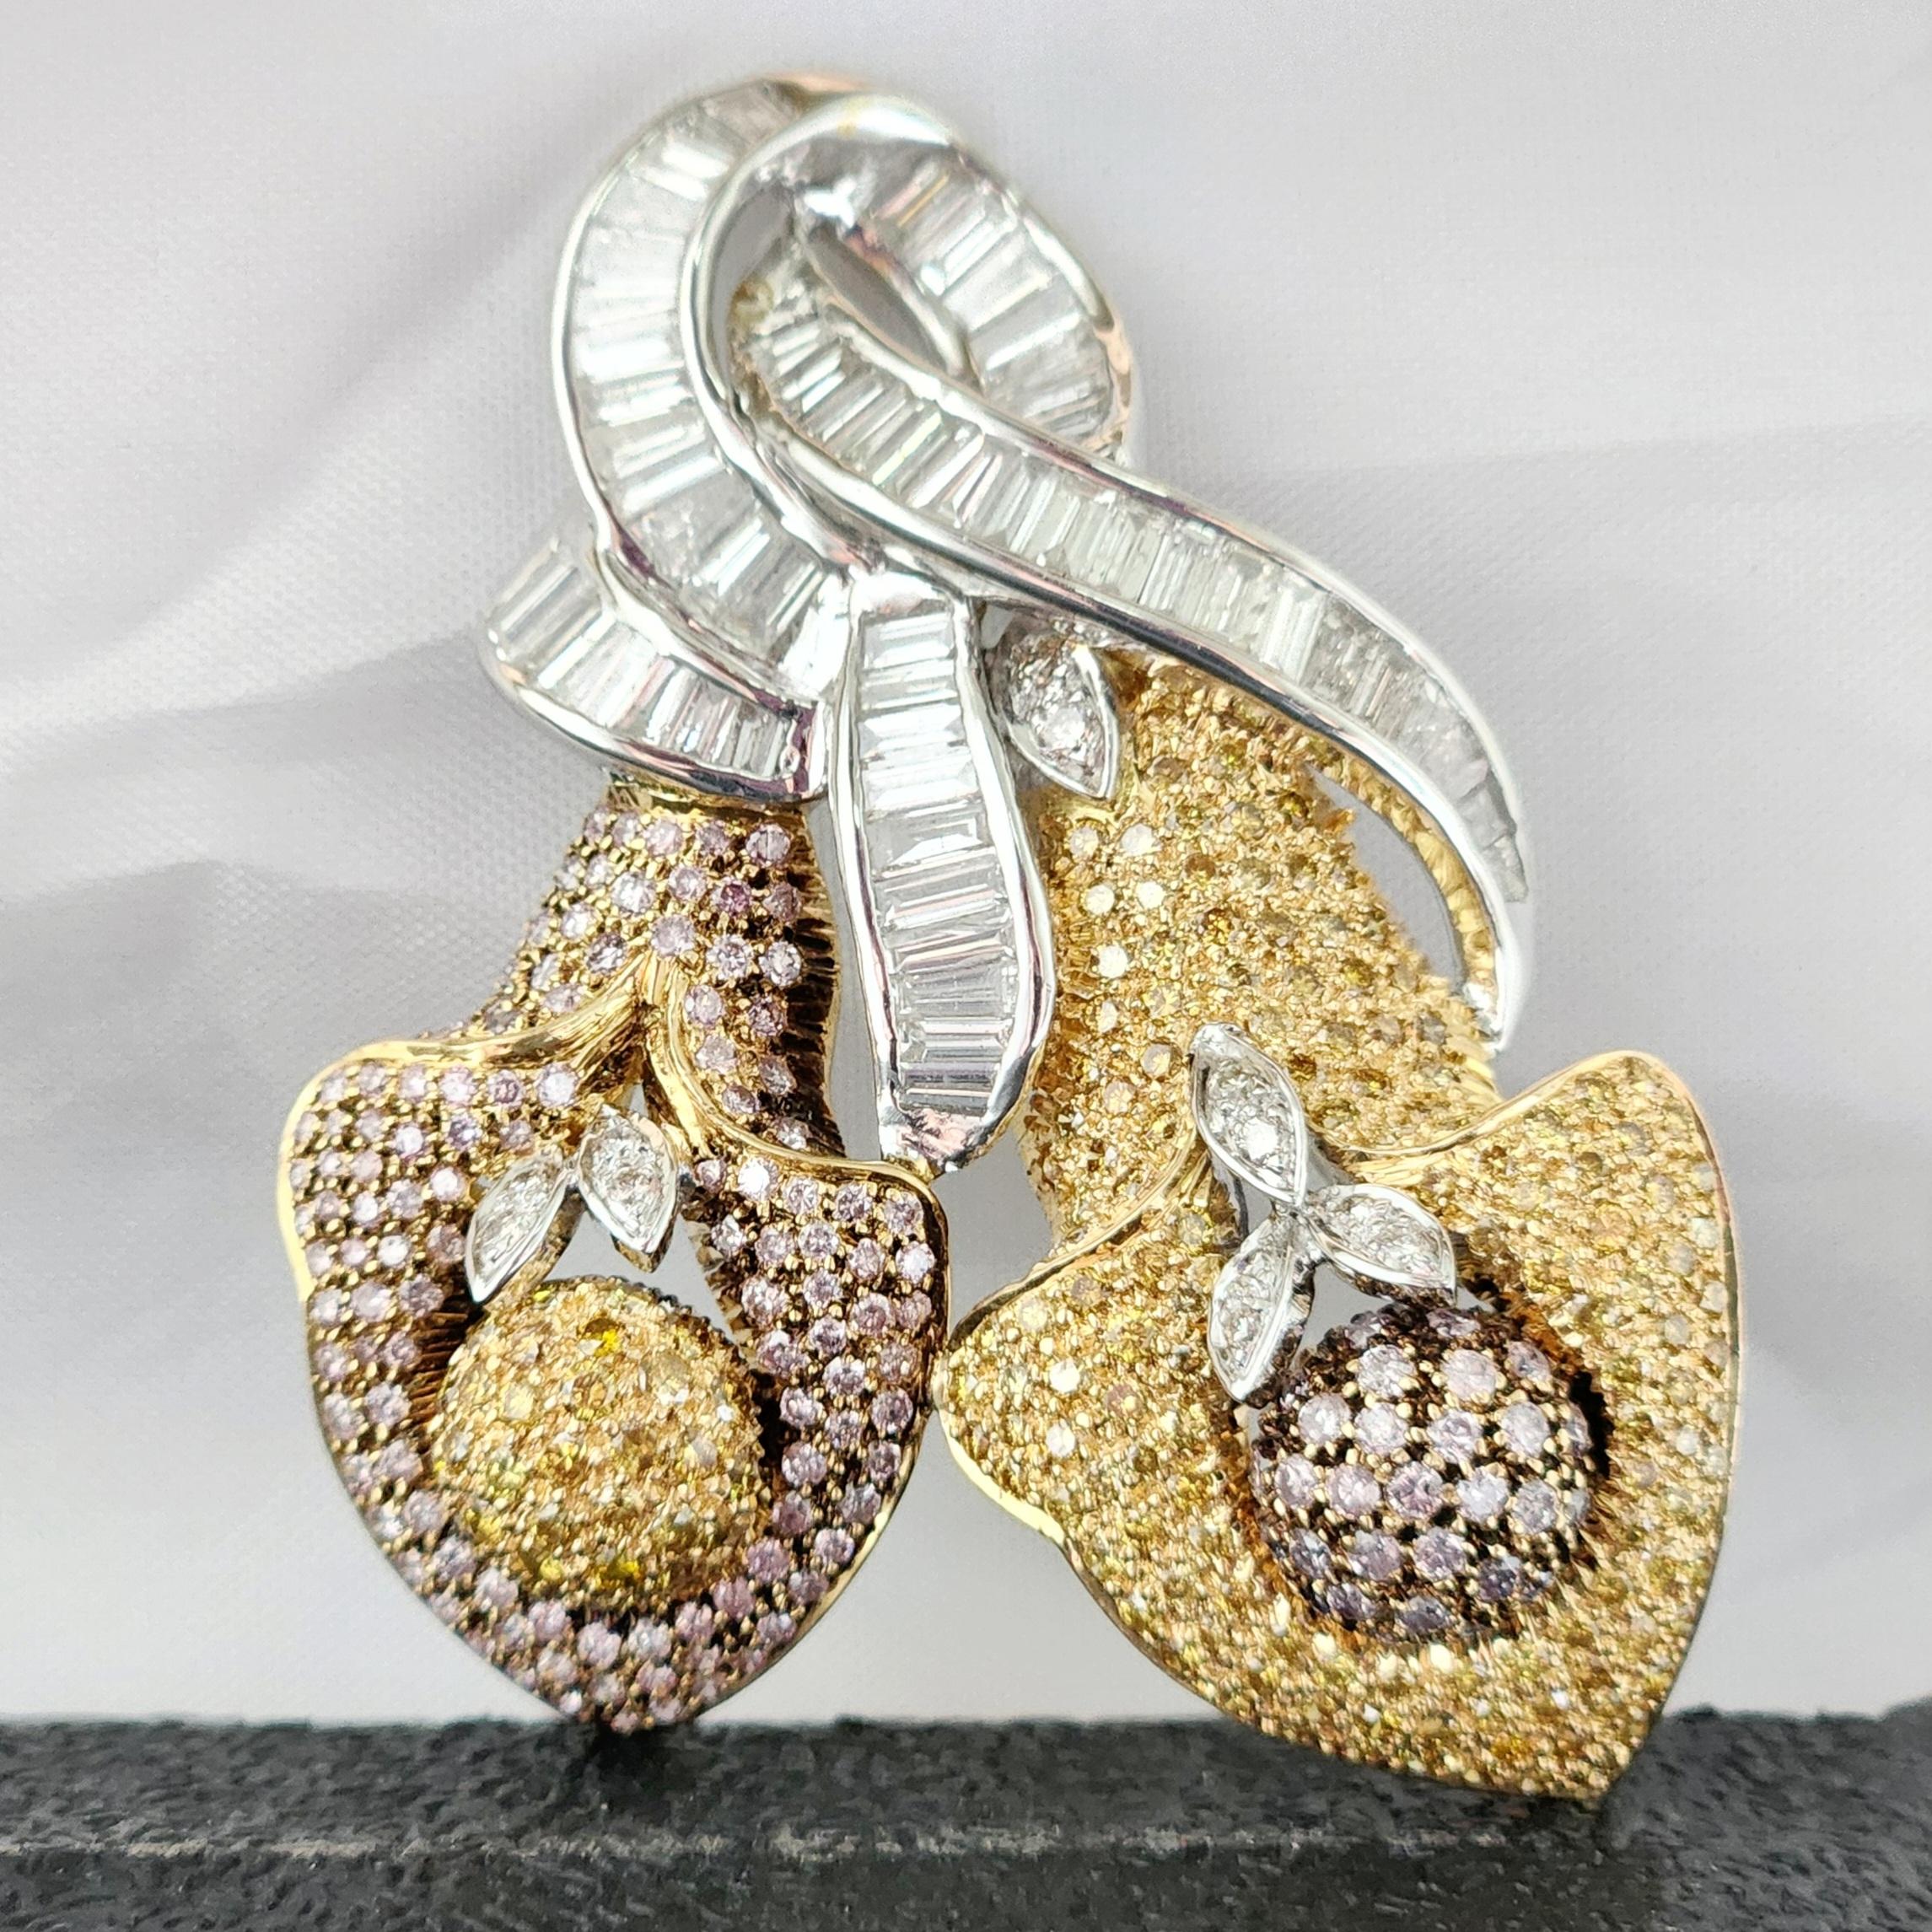 This exquisite Fancy Color Flower Shaped Brooch Pendent is a true masterpiece of craftsmanship. The center of attention is the two flower designs, which are adorned with pink and yellow melee diamonds as the center seeds having small leaves of white